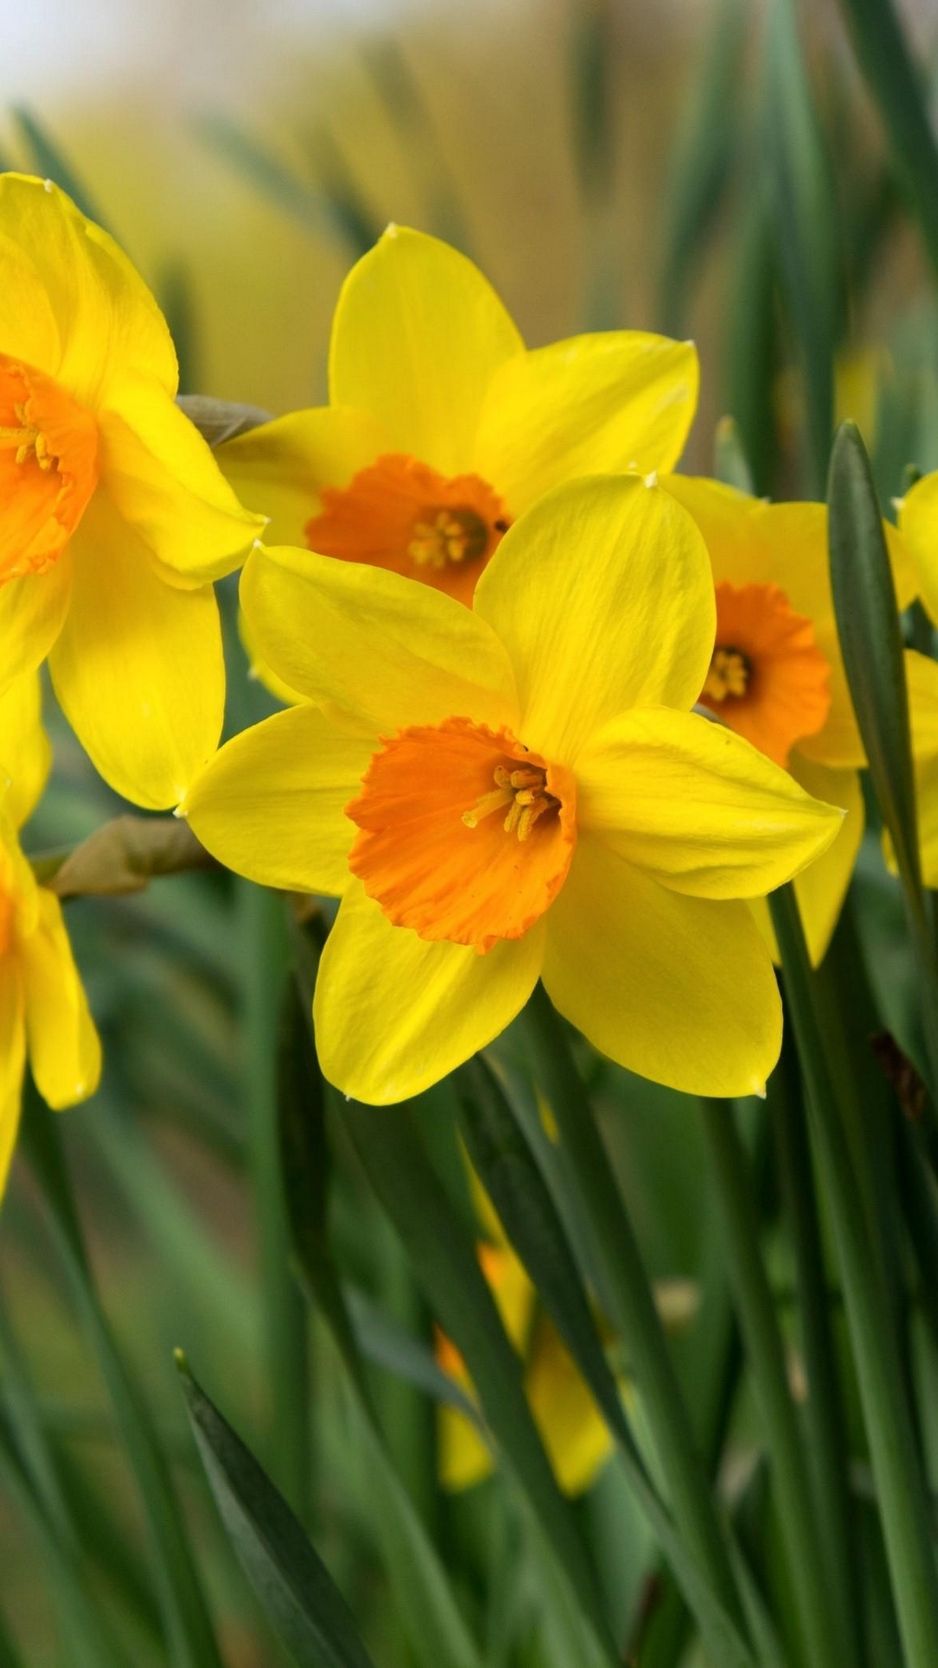 Download wallpaper 938x1668 daffodils, flowers, bright, flowerbed